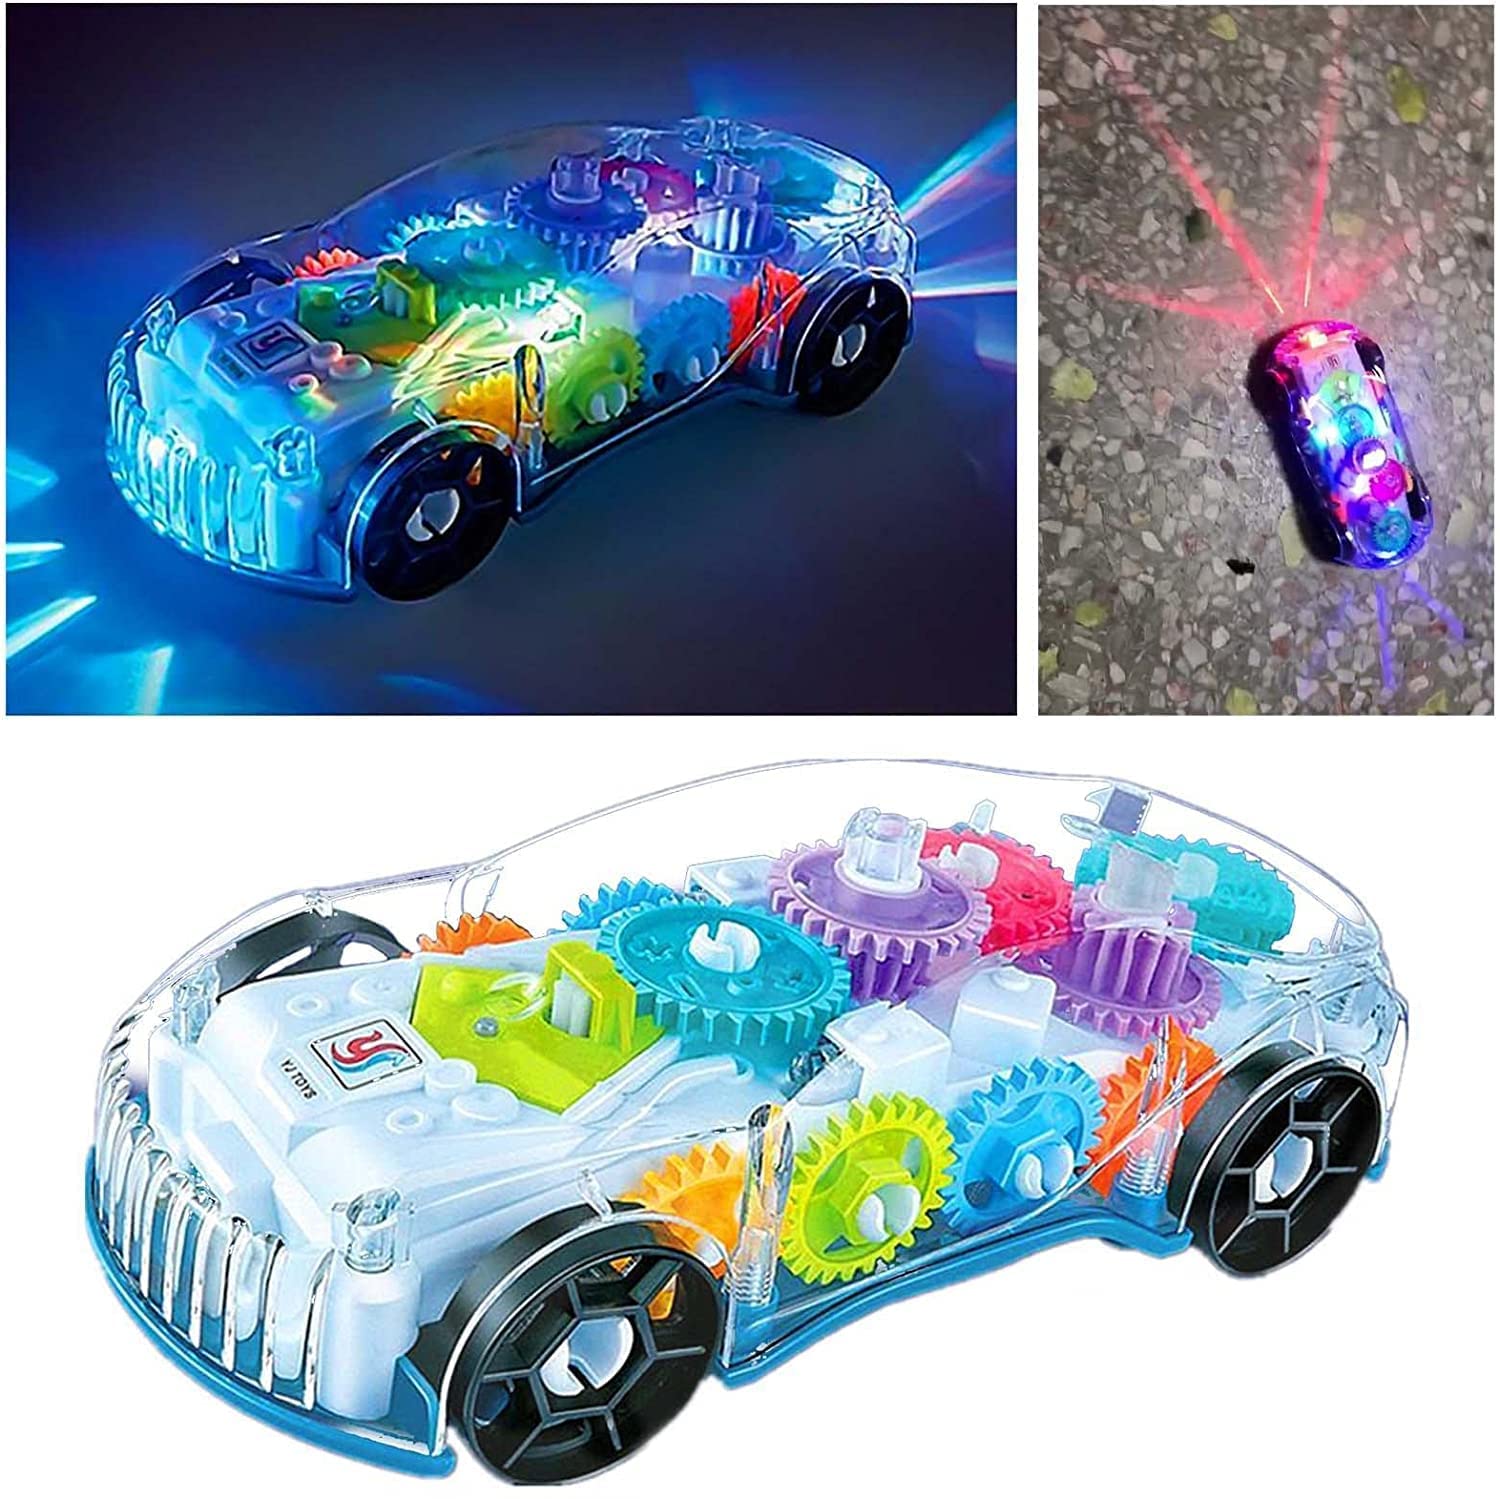 Transparent Gear Simulation Mechanical Sound and Light Car Toy for Boys and Girls